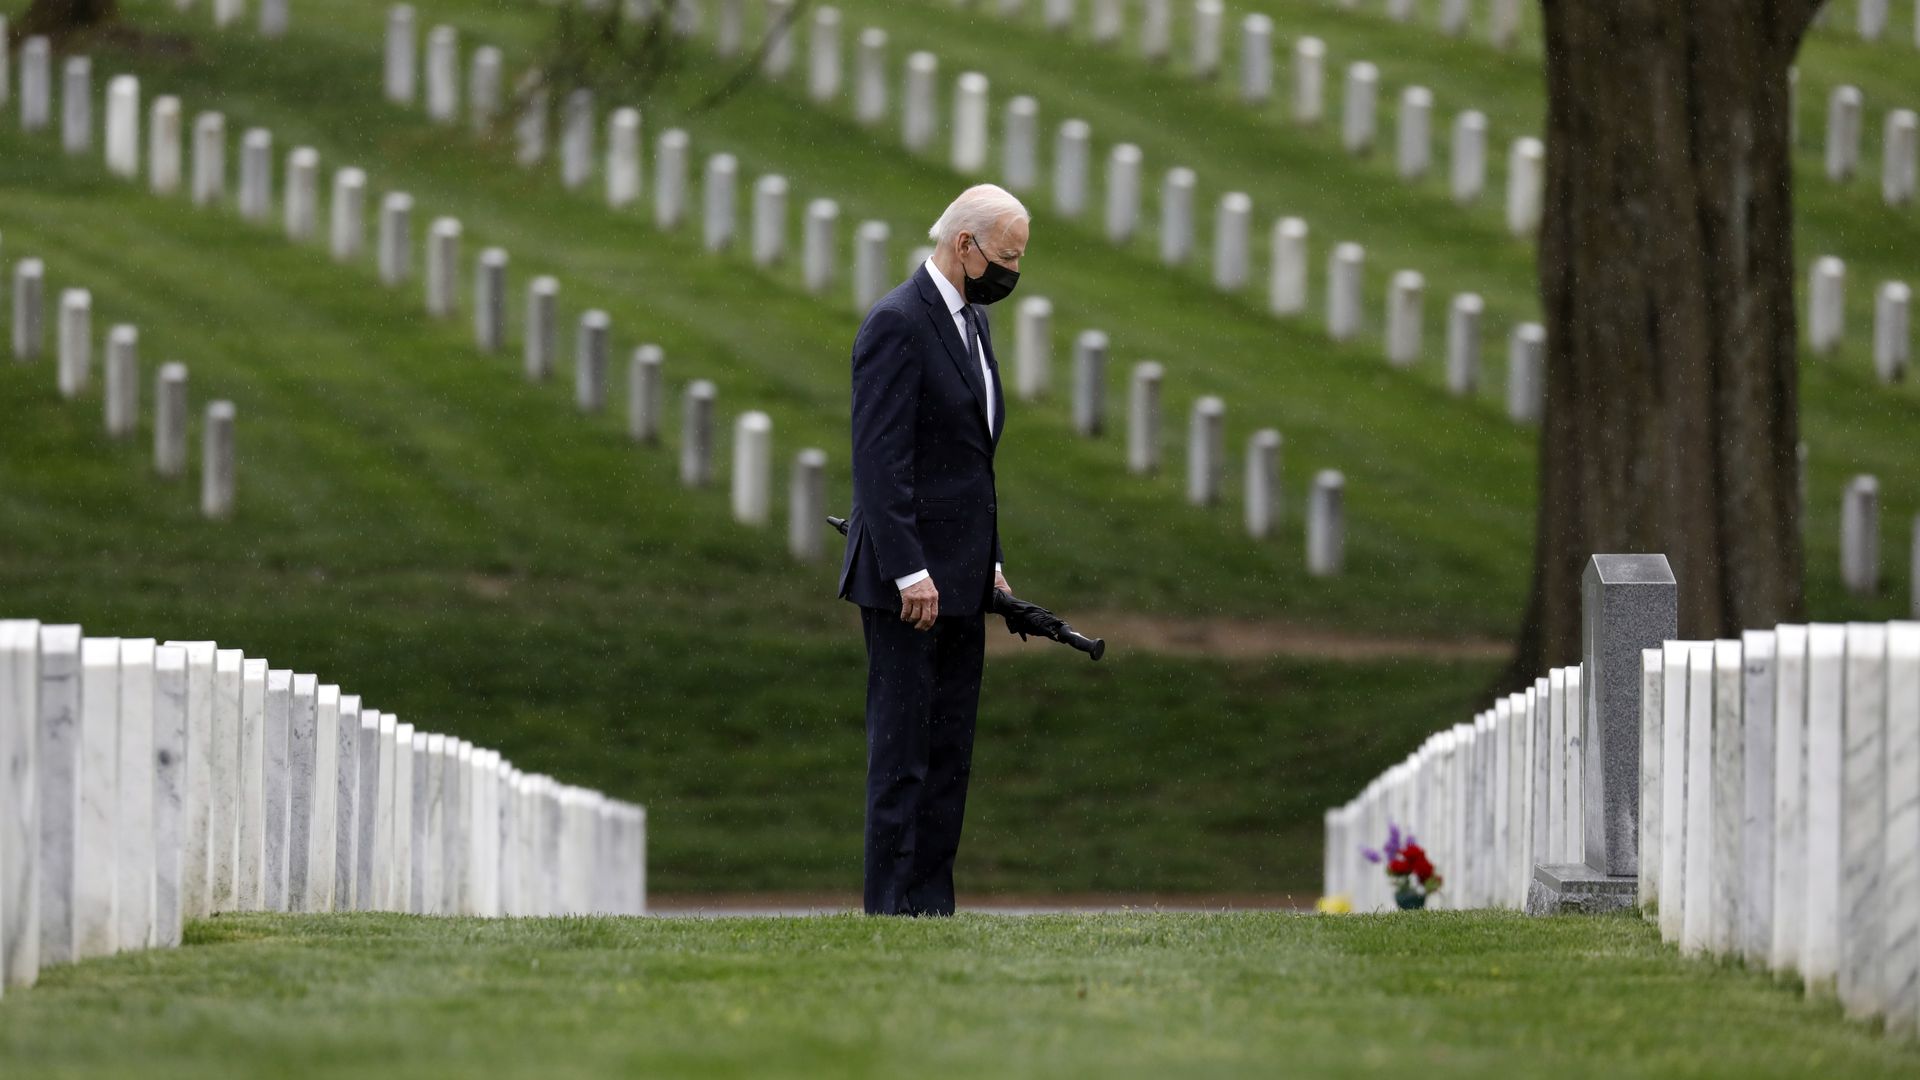 President Biden is seen standing amid the graves of armed forces members who died in Iraq and Afghanistan.